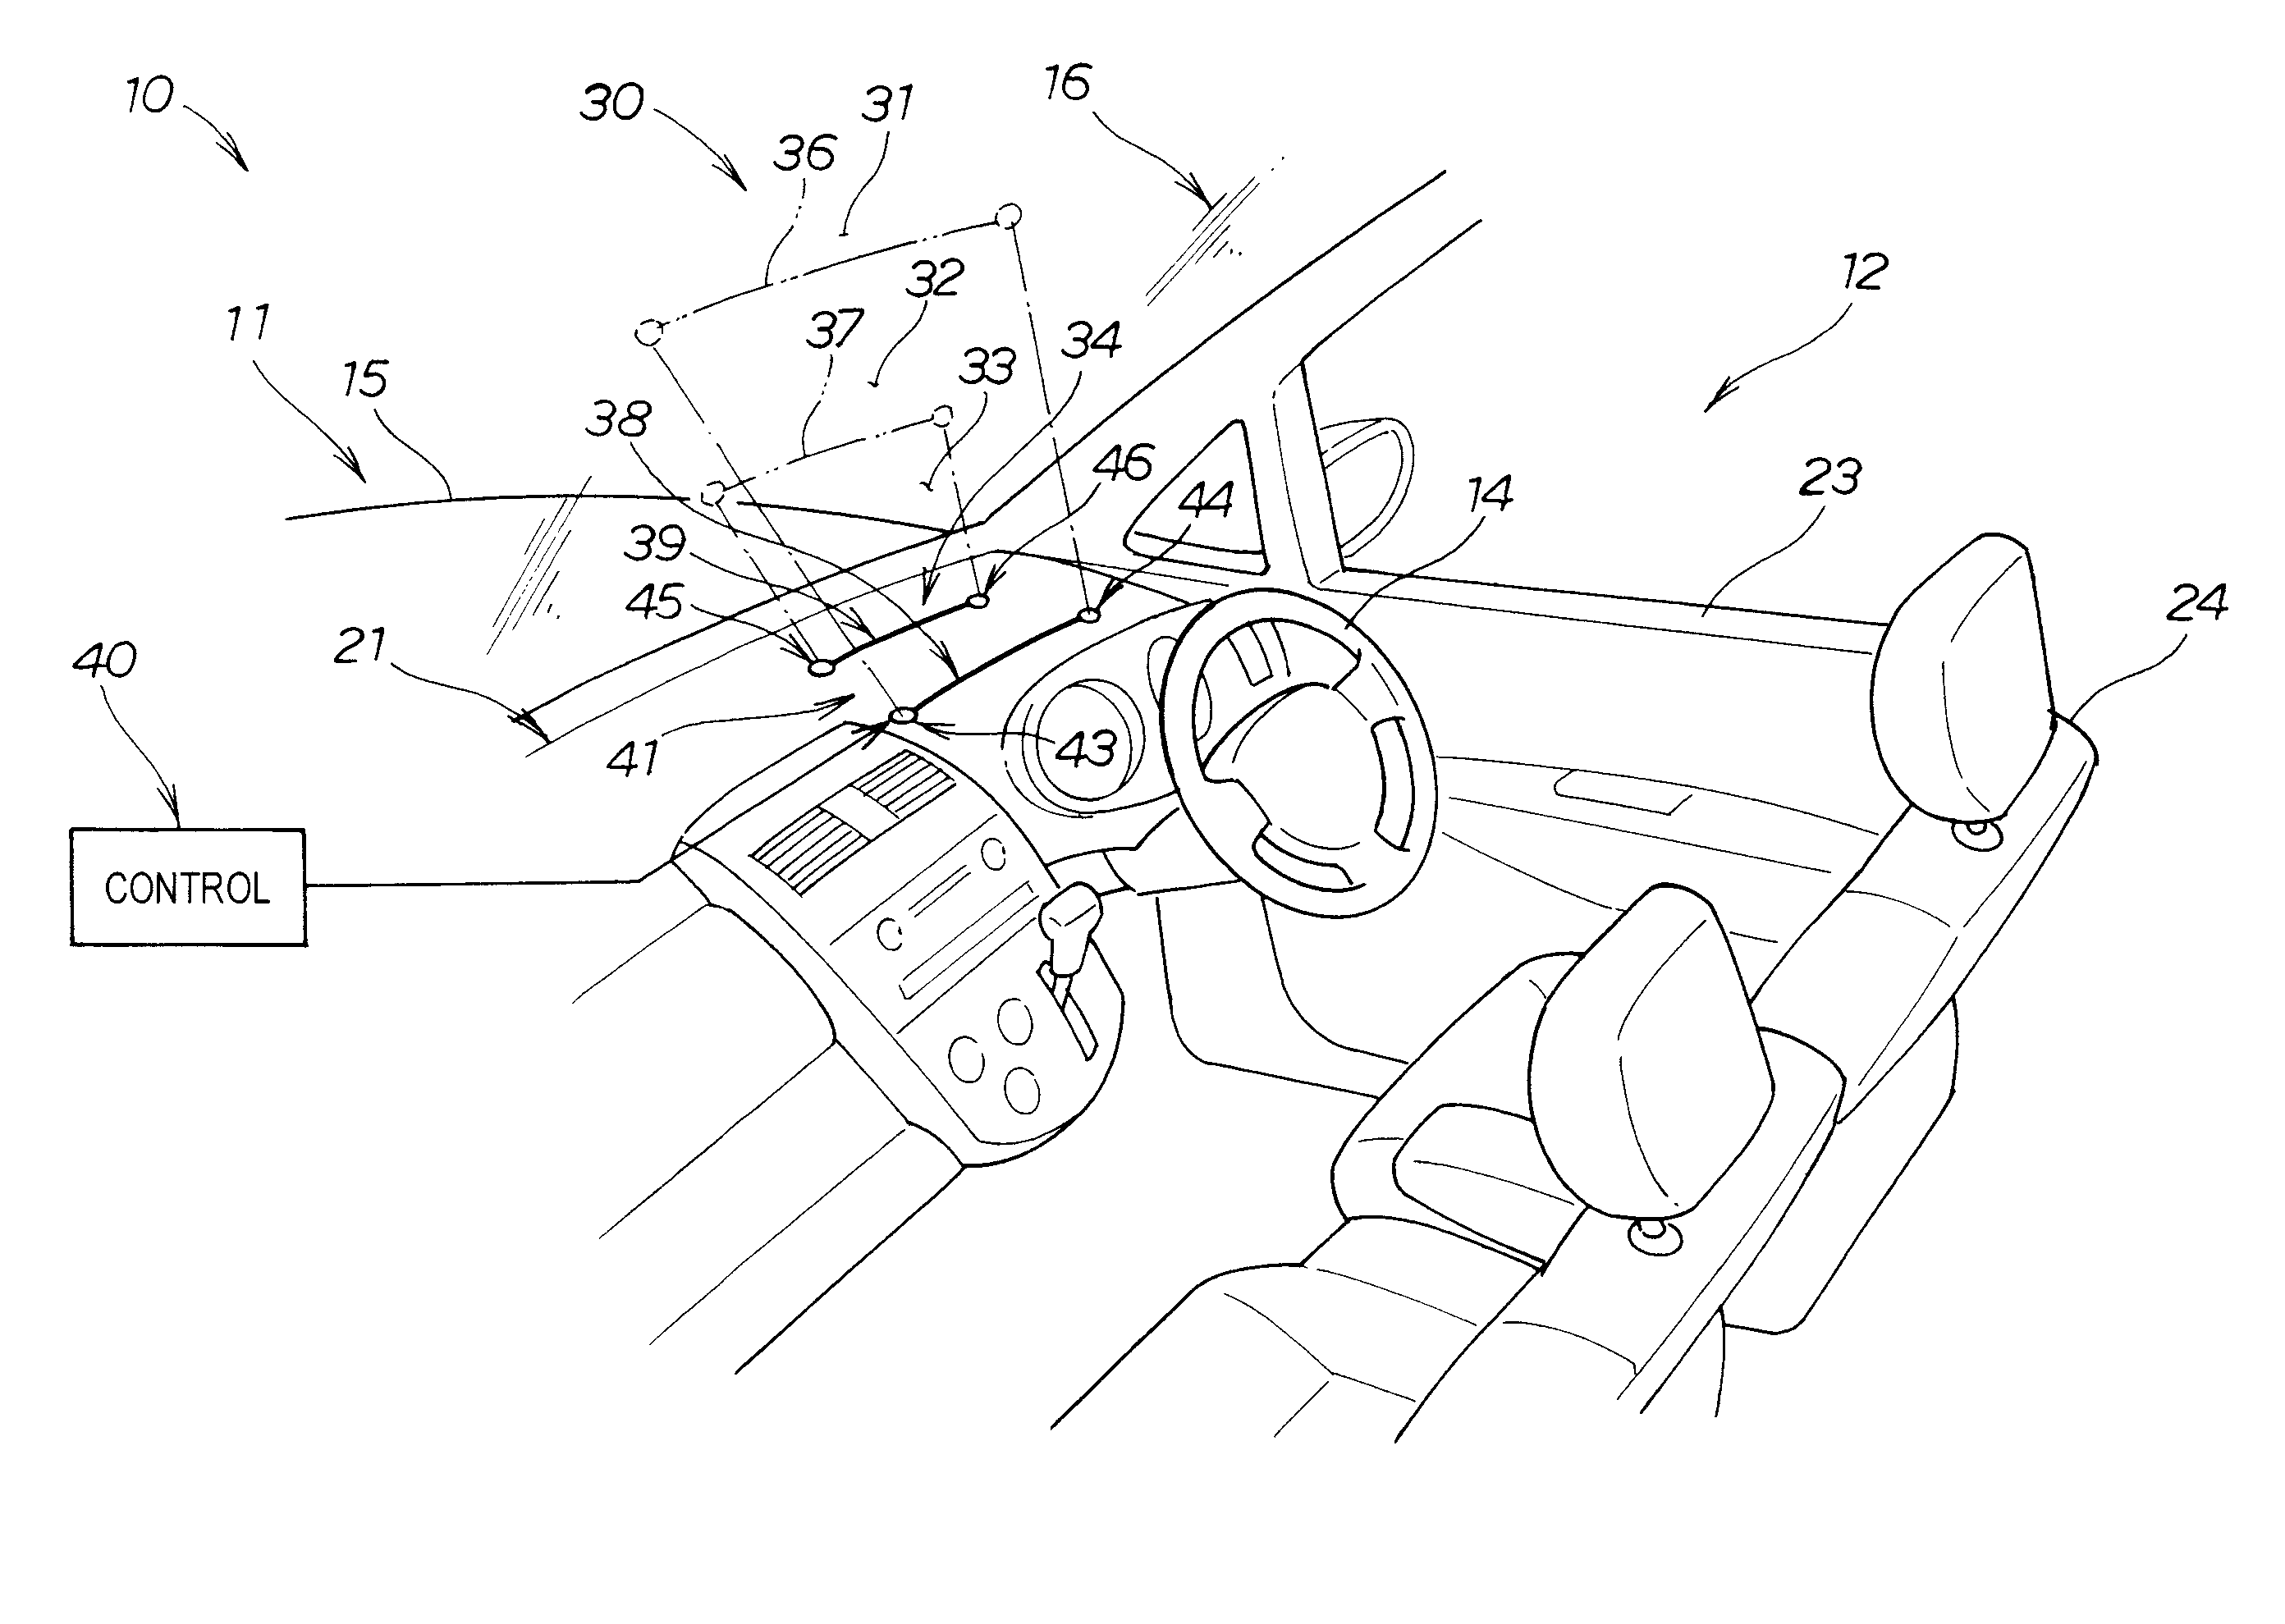 Vision enhancement device for use in vehicle